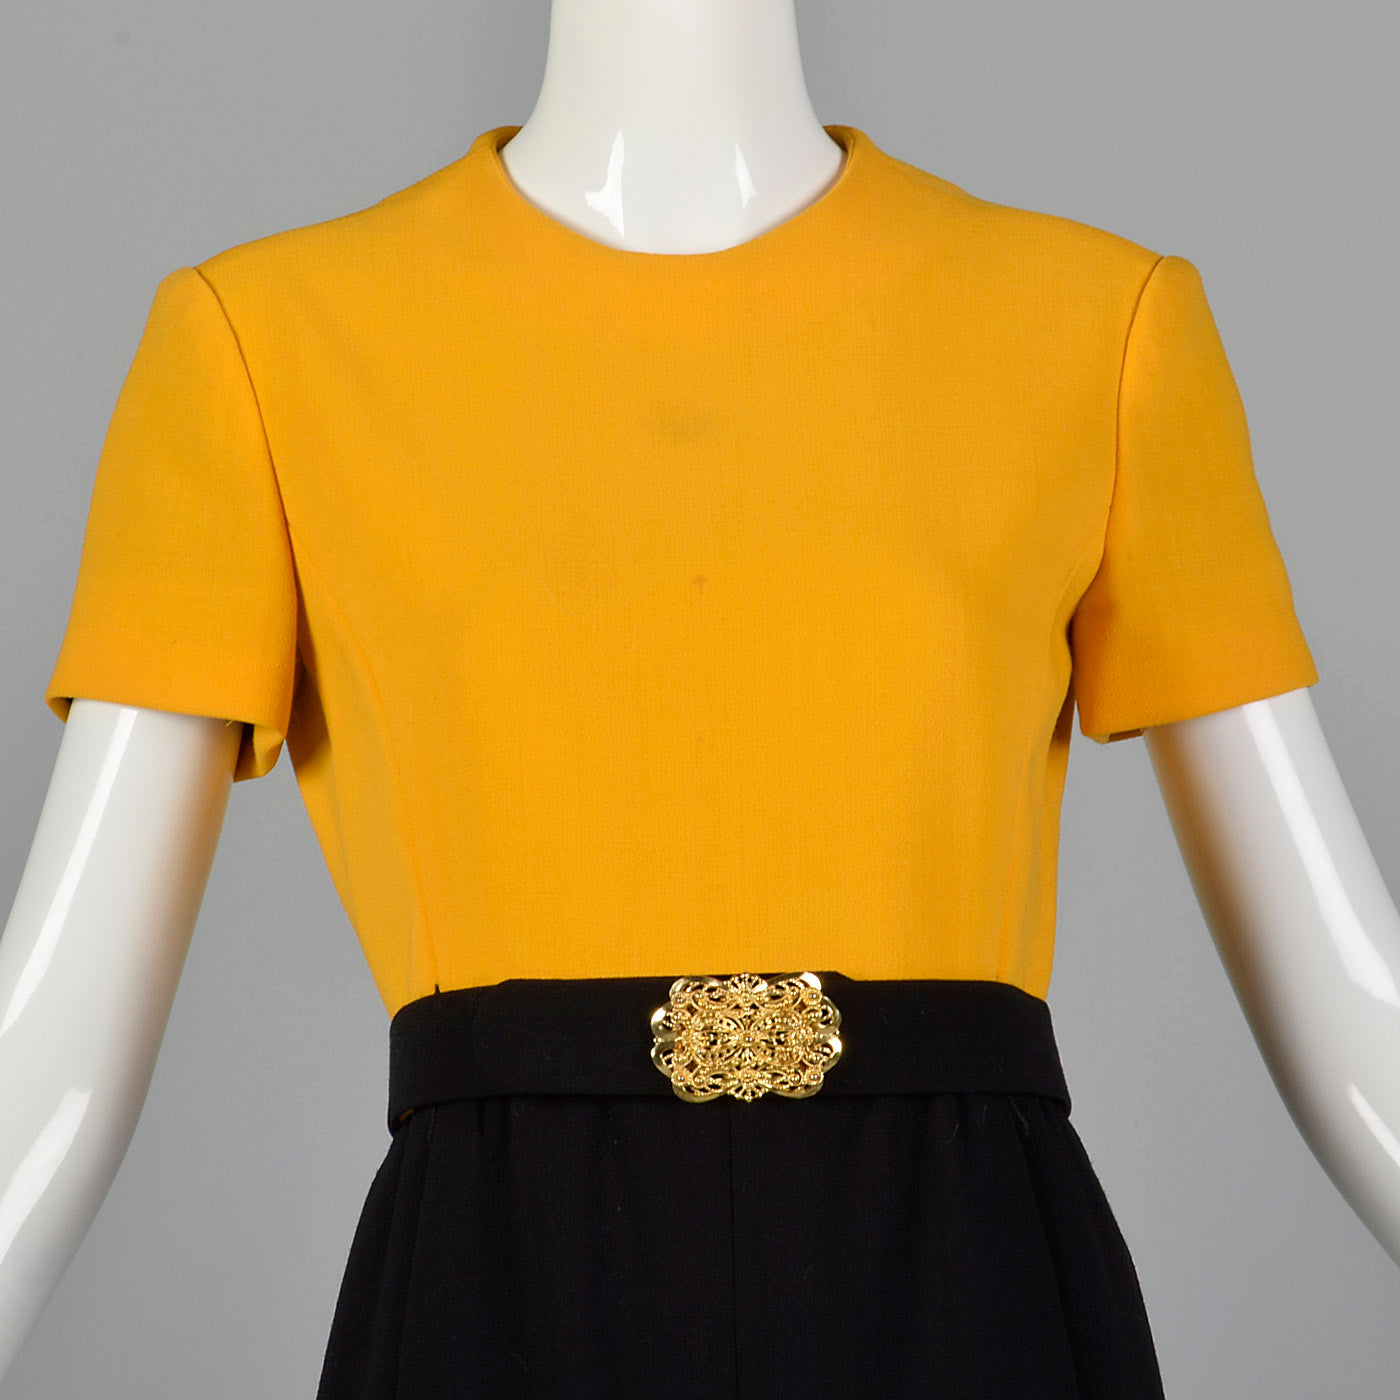 1960s Yellow and Black Colorblock Dress